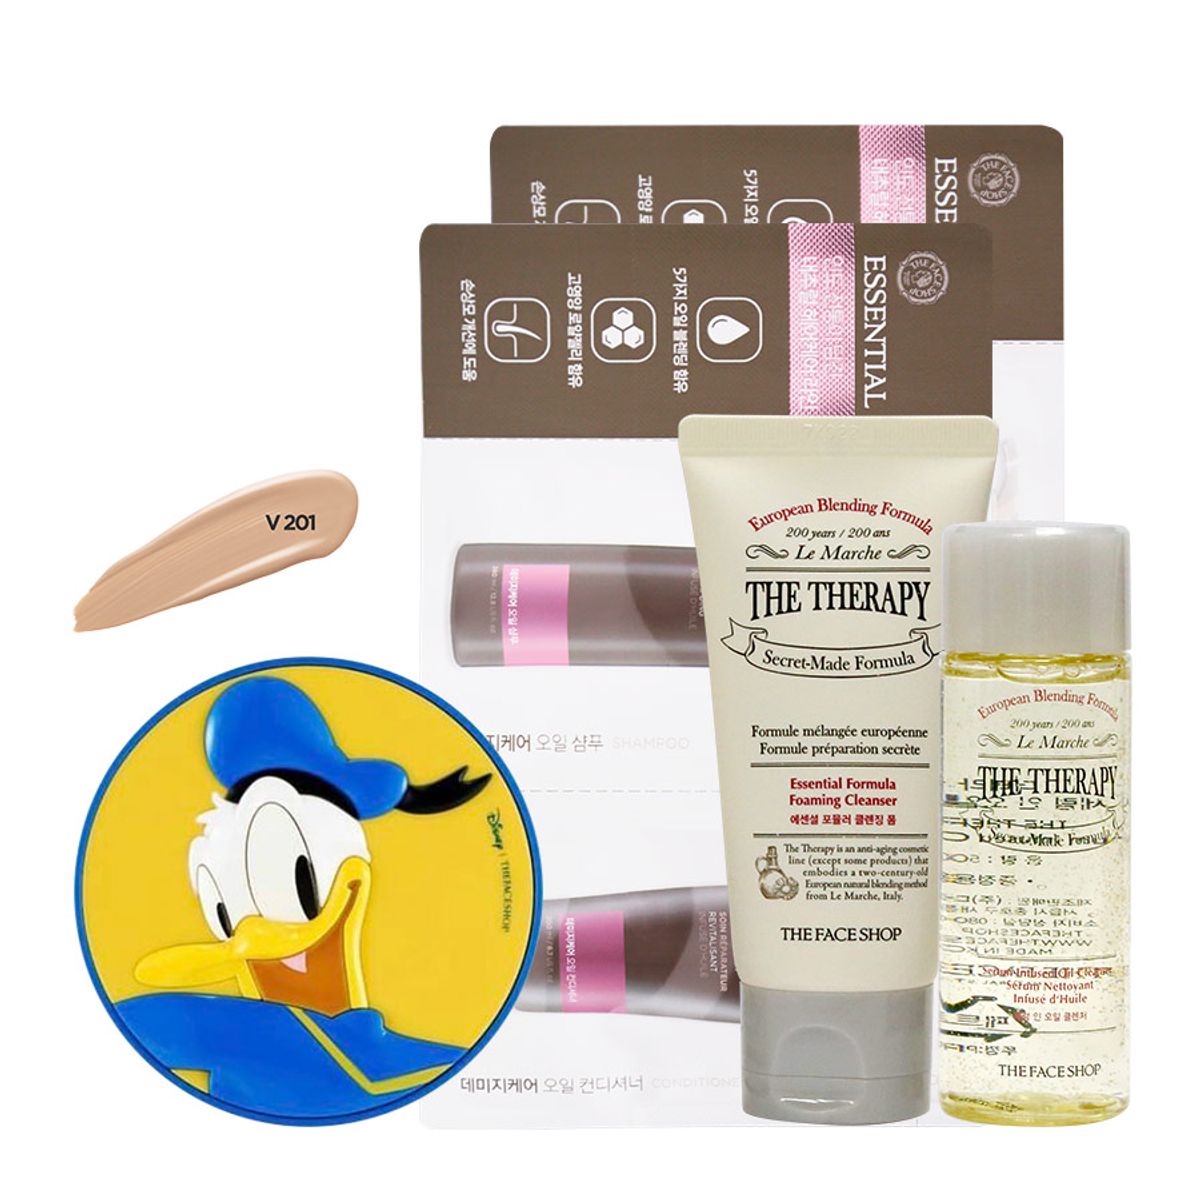 bo-trang-diem-tfs-phan-nuoc-da-nang-bb-power-perfection-cushion-spf50-pa-v201-disney-donald-cushion-the-therapy-cleansing-kit-2ea-essential-damage-care-oil-infused-shampoo-conditioner-8ml-1